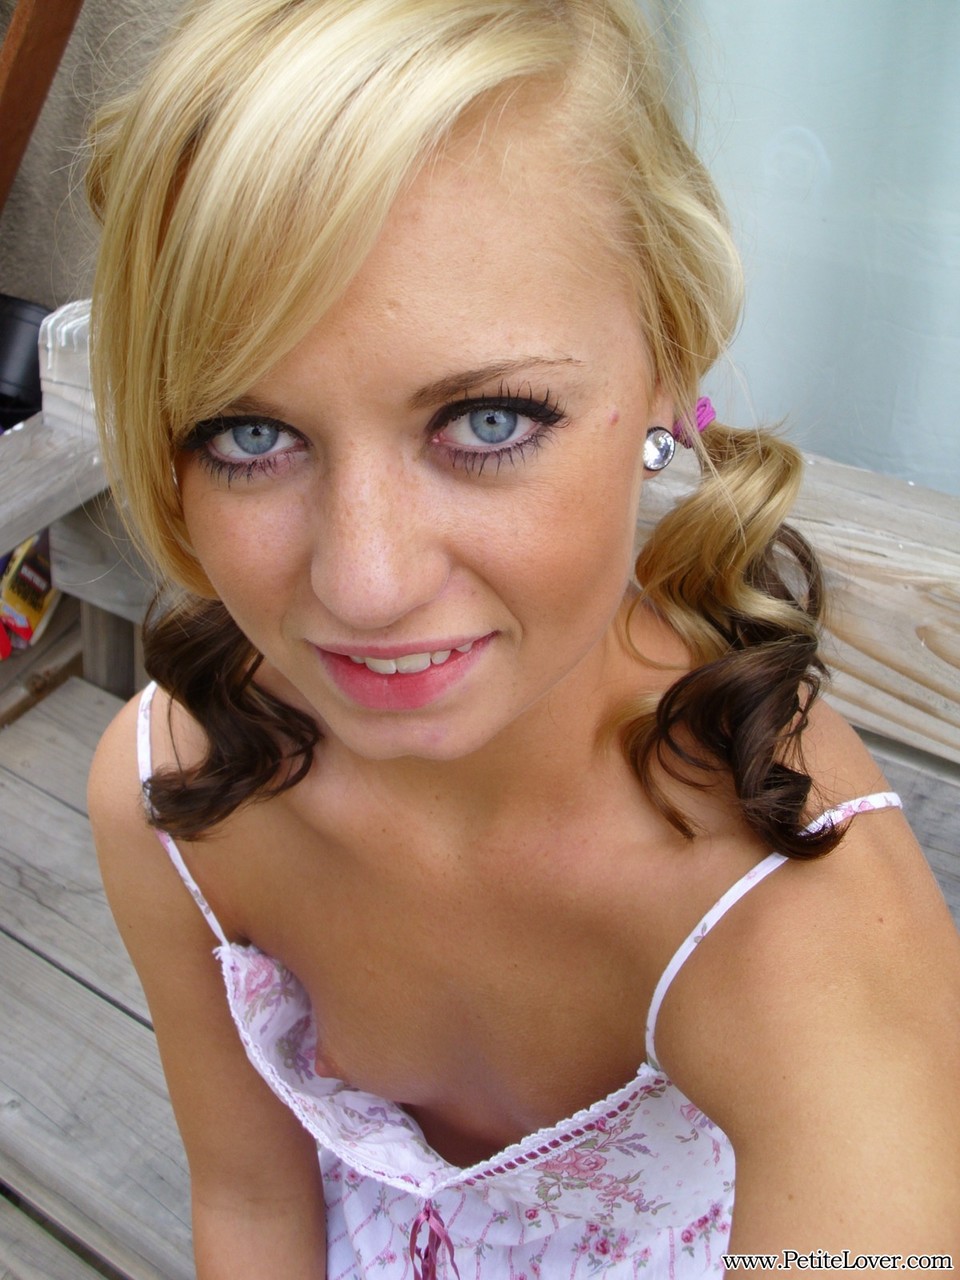 Cute blonde Tiff in pigtails showing off her wee small tits & tiny bald pussy foto porno #428478636 | Petite Lover Pics, Tiff, Amateur, porno móvil